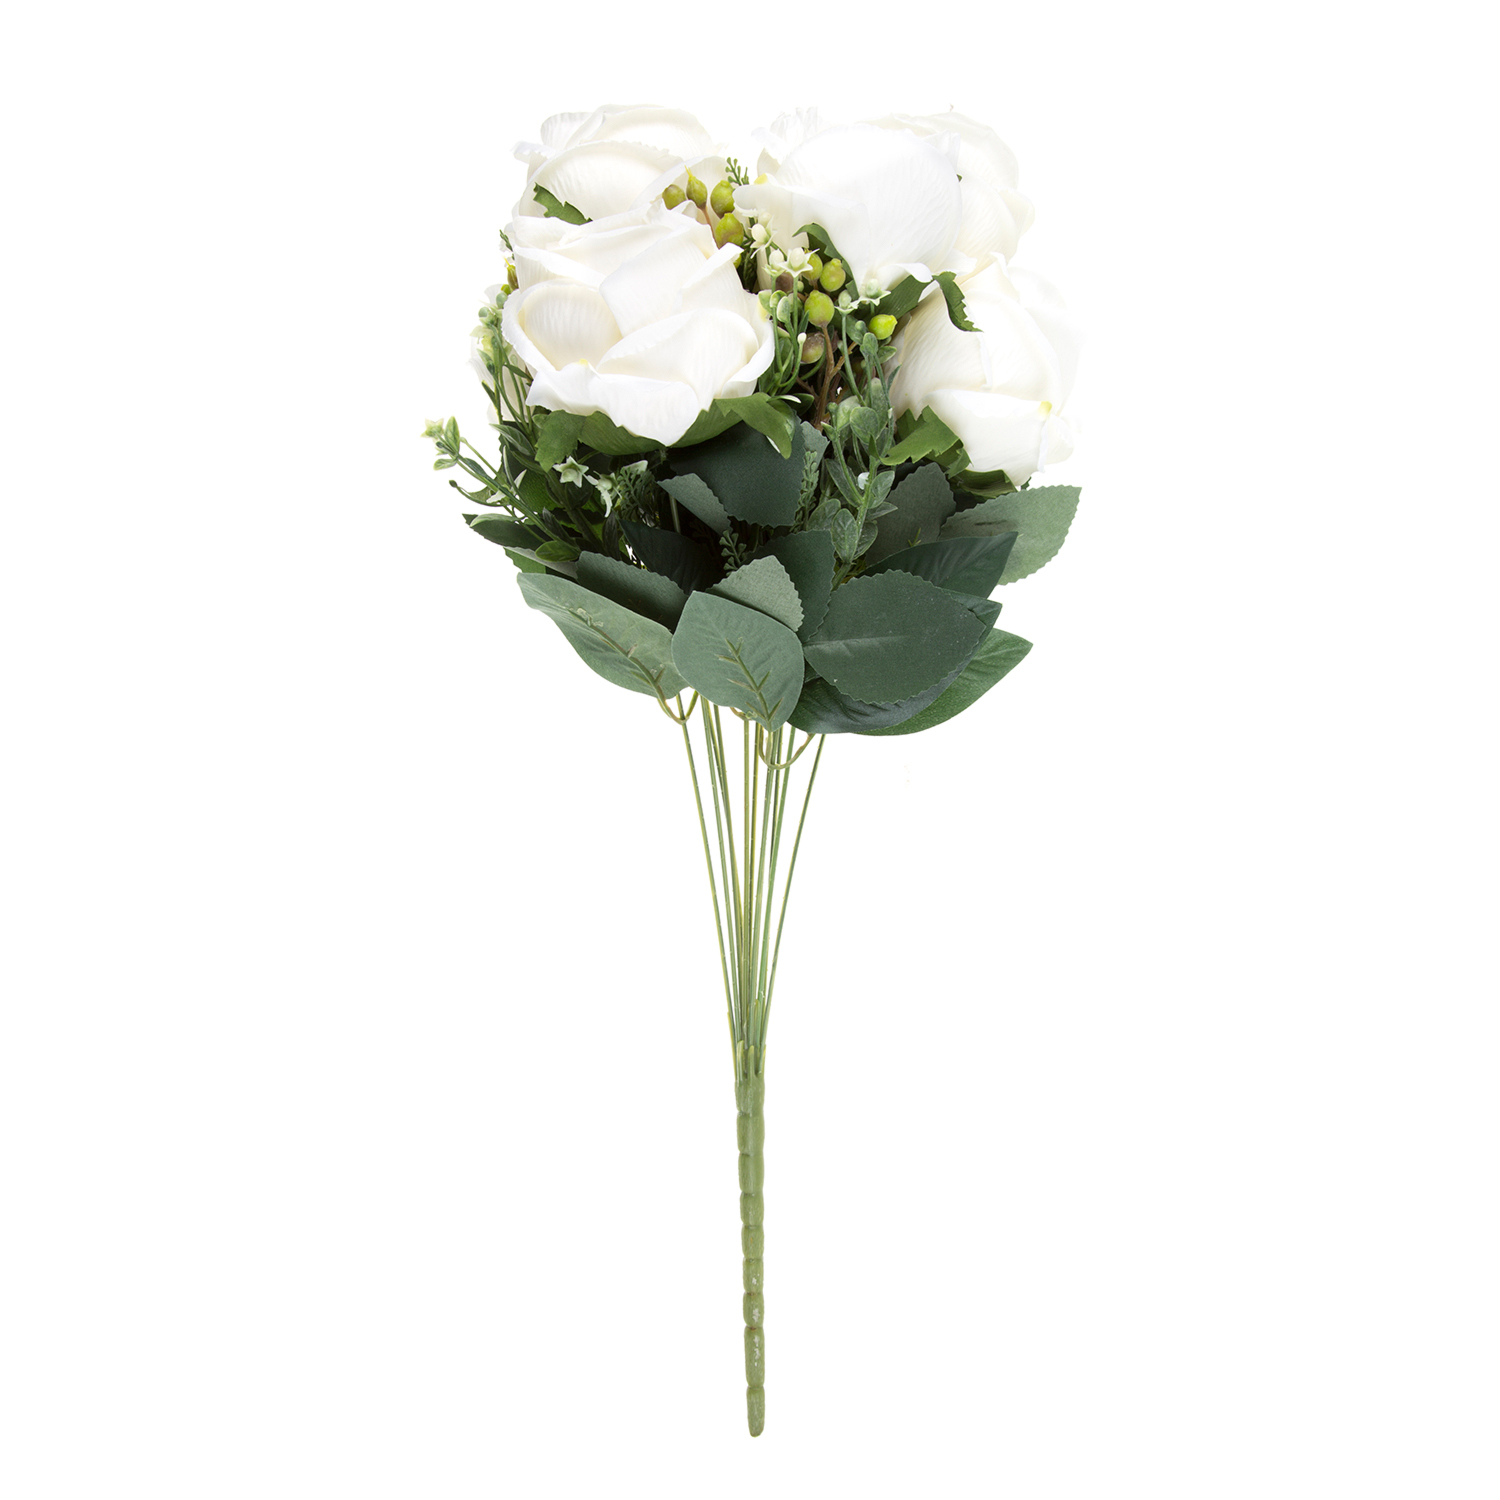 Vintage White Peony Bouquet Artificial Flower Bunch Image